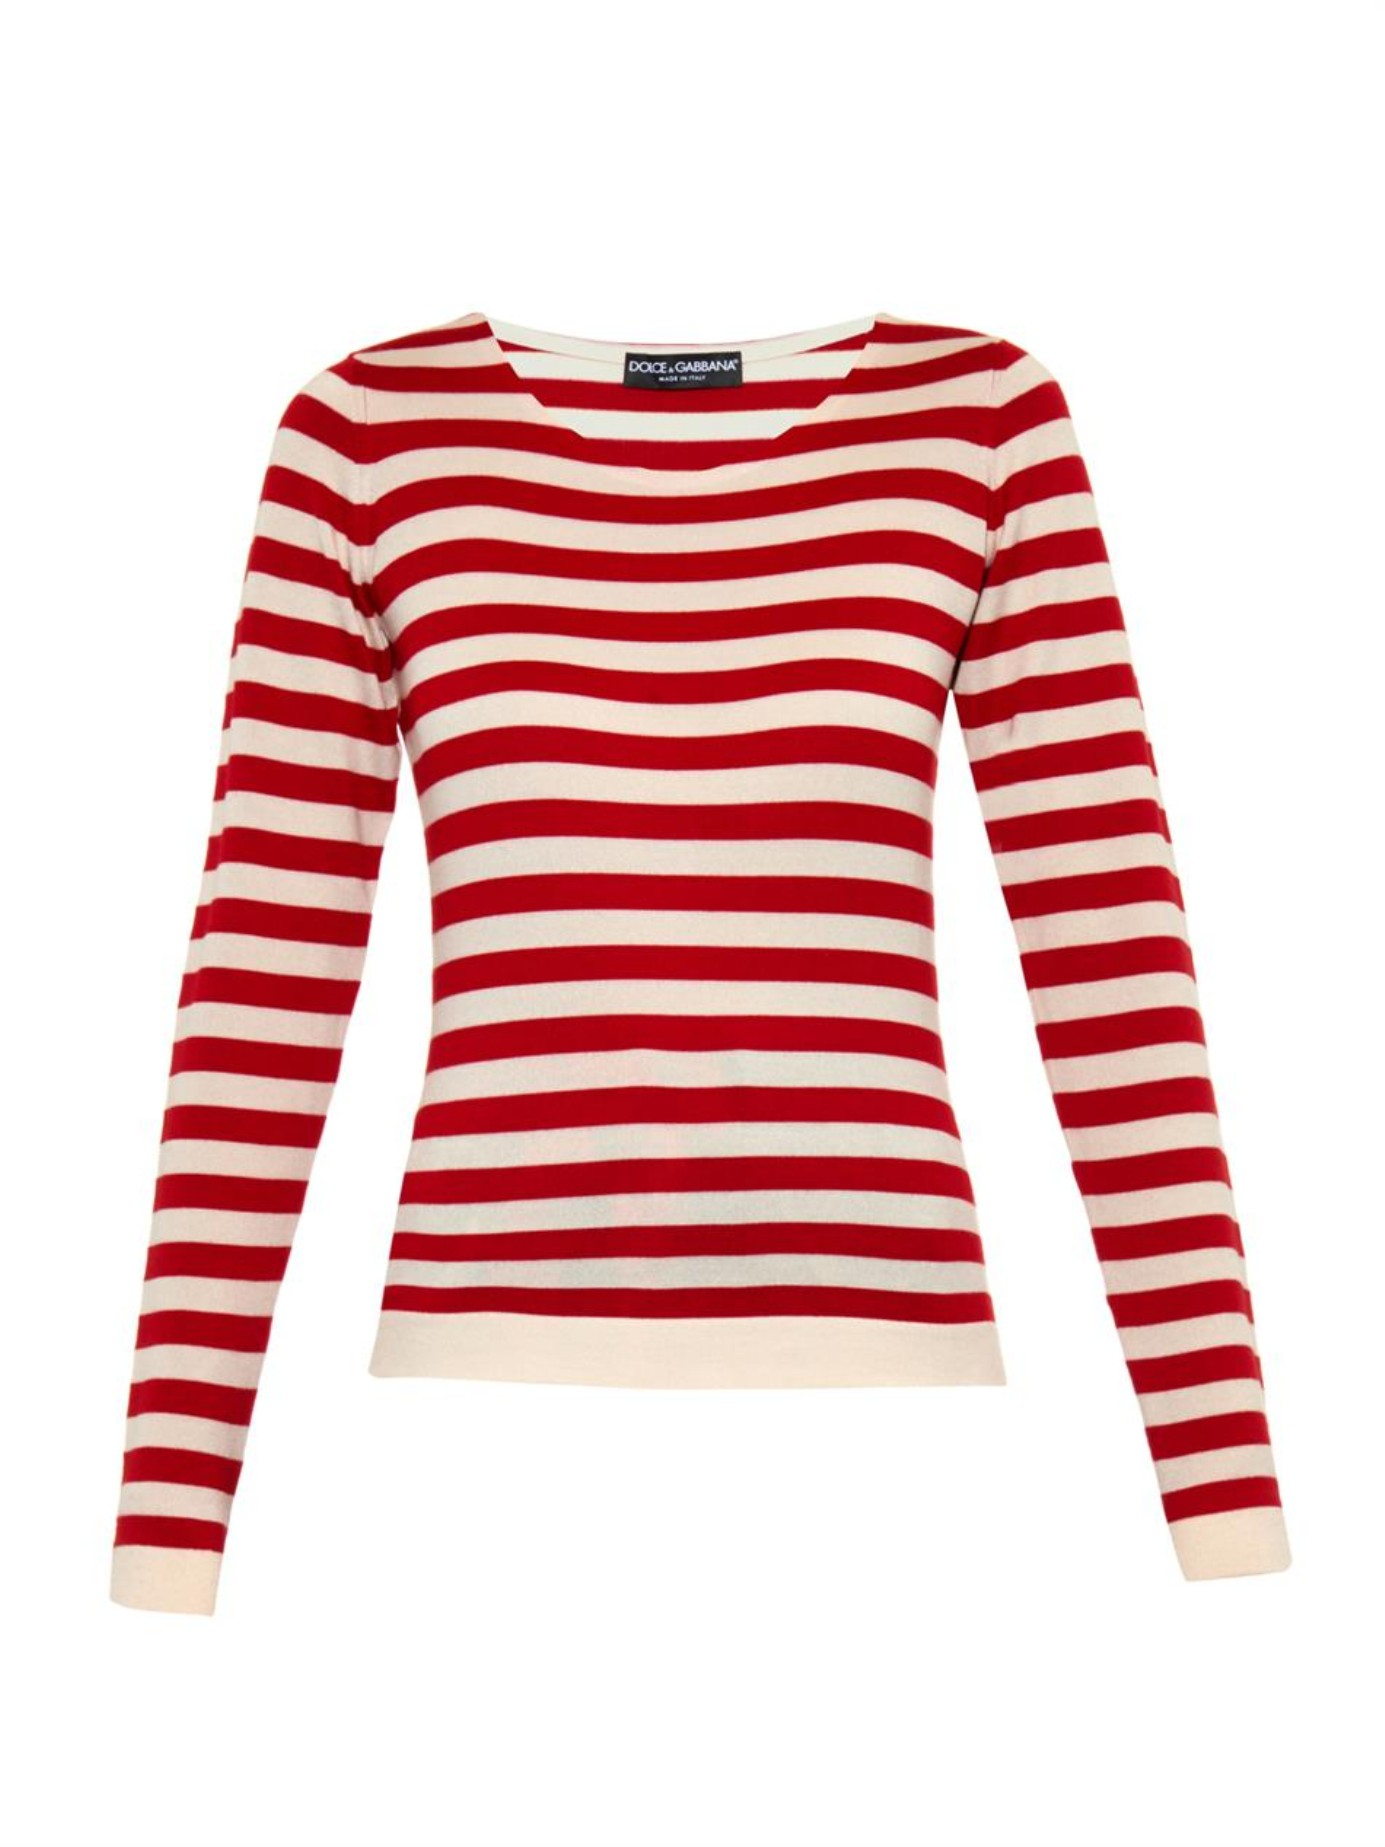 Dolce & gabbana Striped Cashmere And Silk-Blend Sweater in Red | Lyst